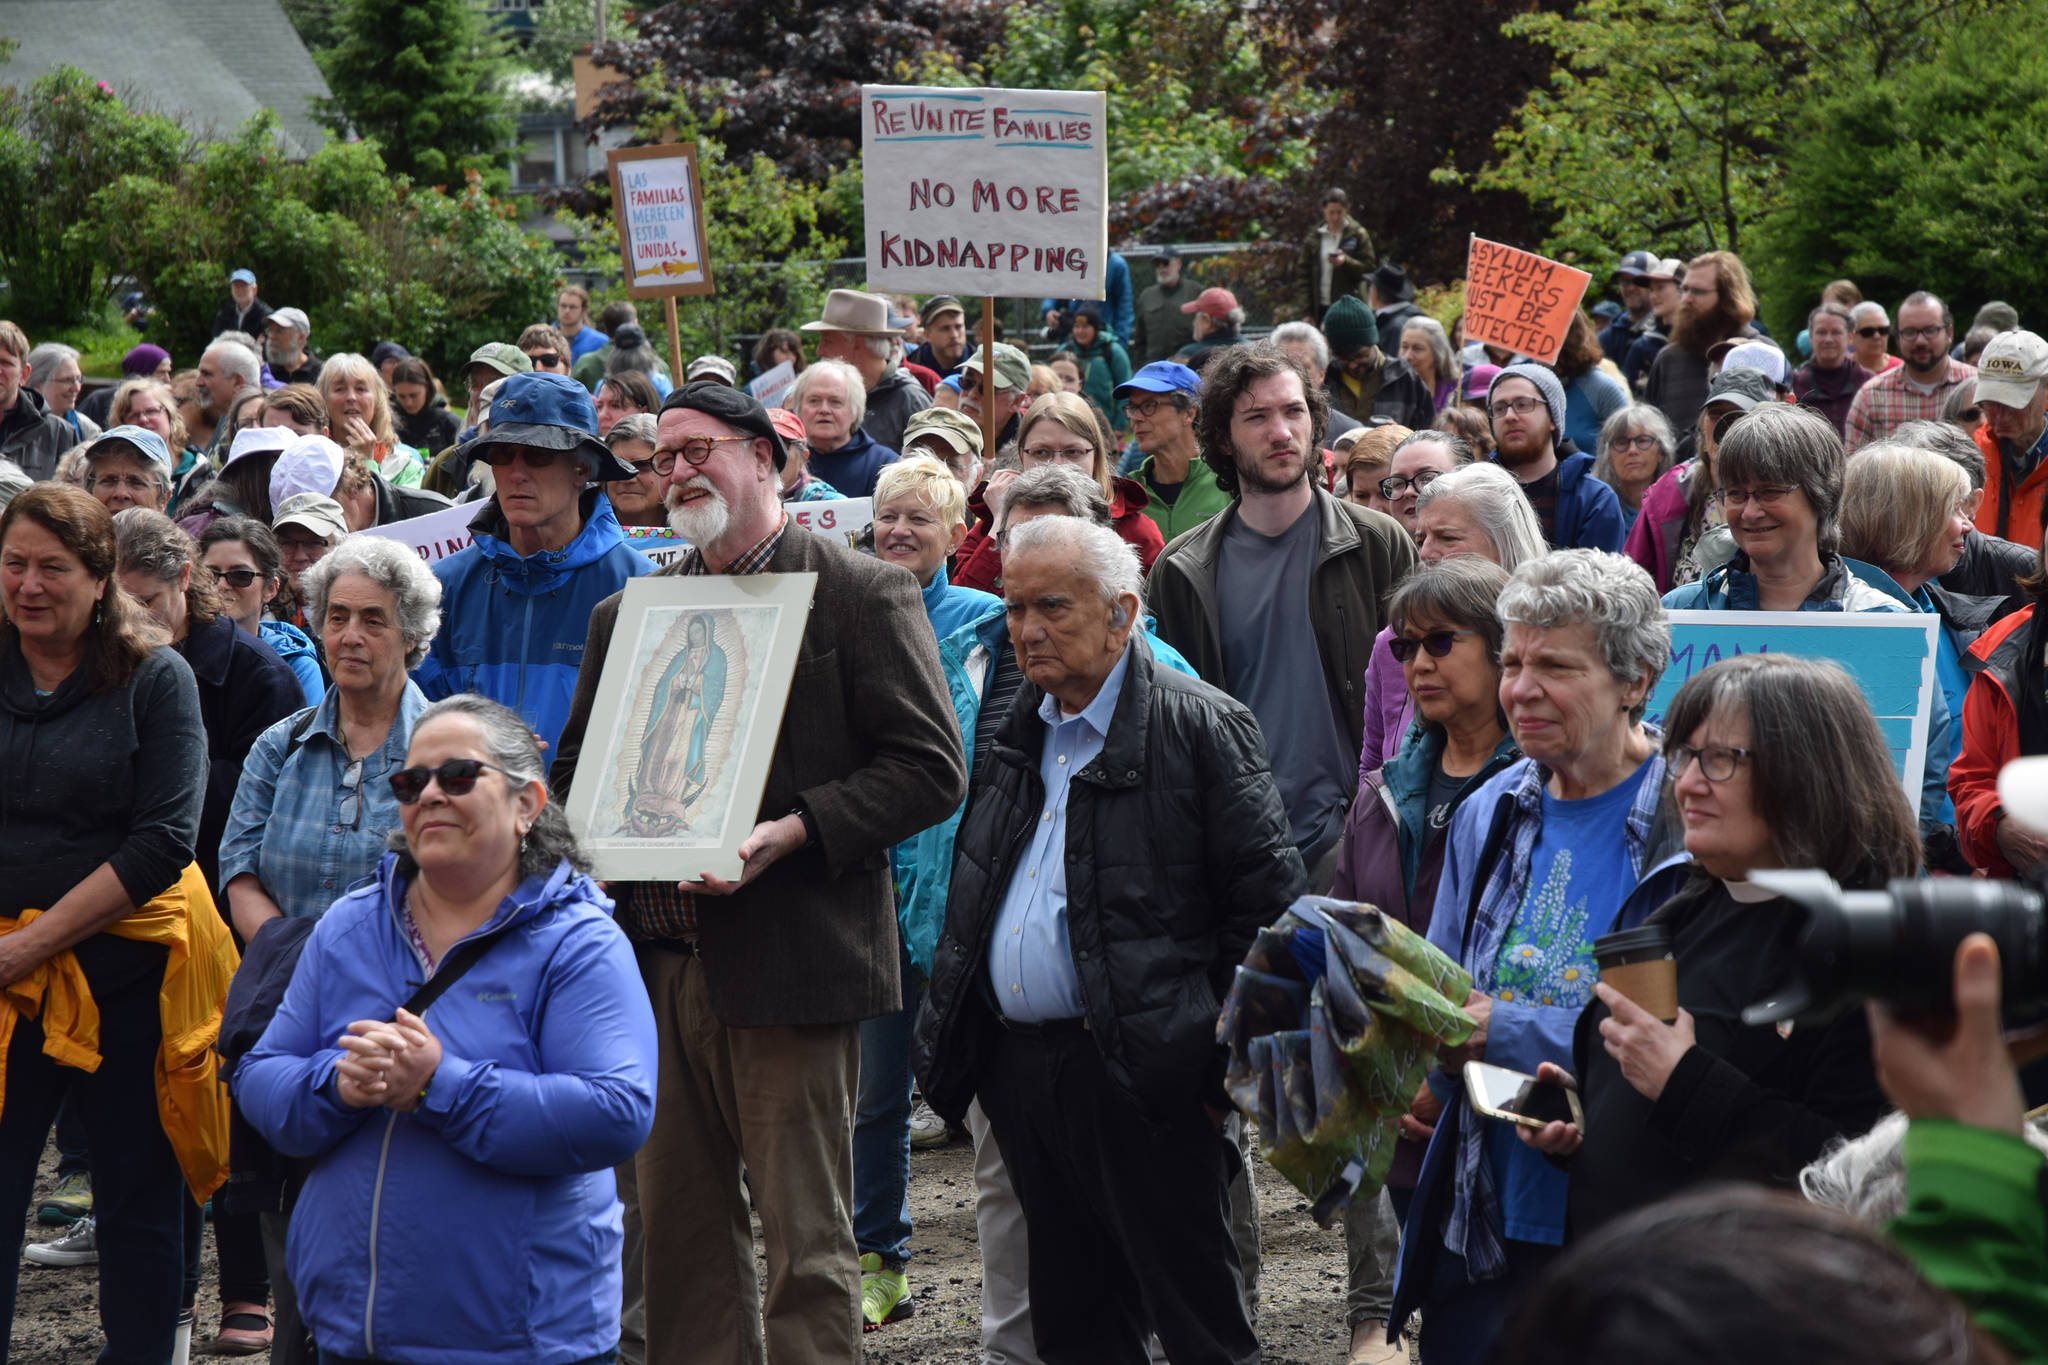 About 400 protesters gathered Saturday for the Families Belong Together Rally at Capital Park to speak out against family separation at the U.S. southern border. (Kevin Gullufsen | Juneau Empire)